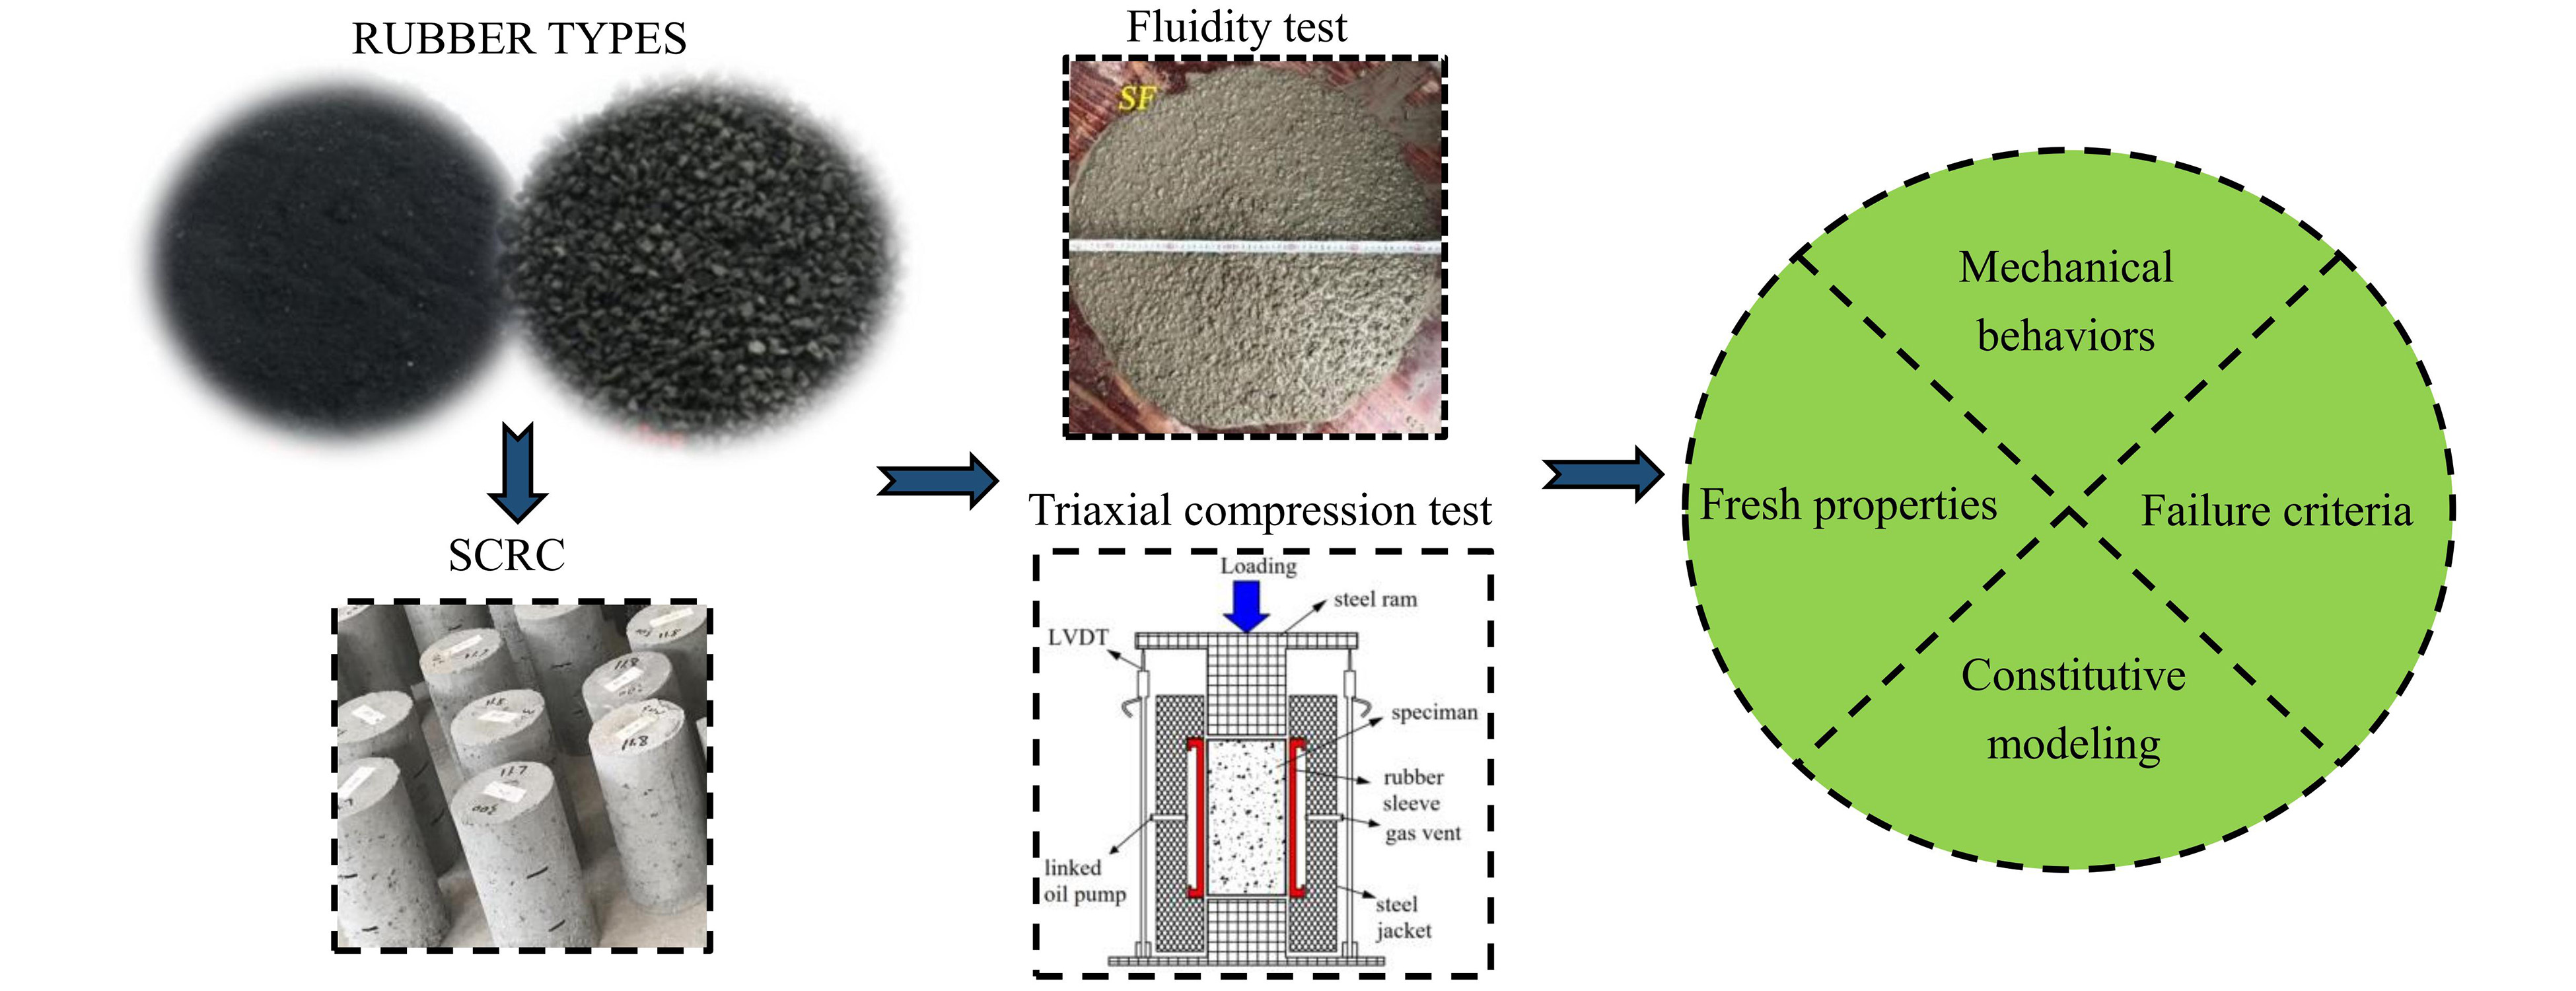 Mechanical Properties of Self-Compacting Rubberized Concrete with Different Rubber Types under Triaxial Compression